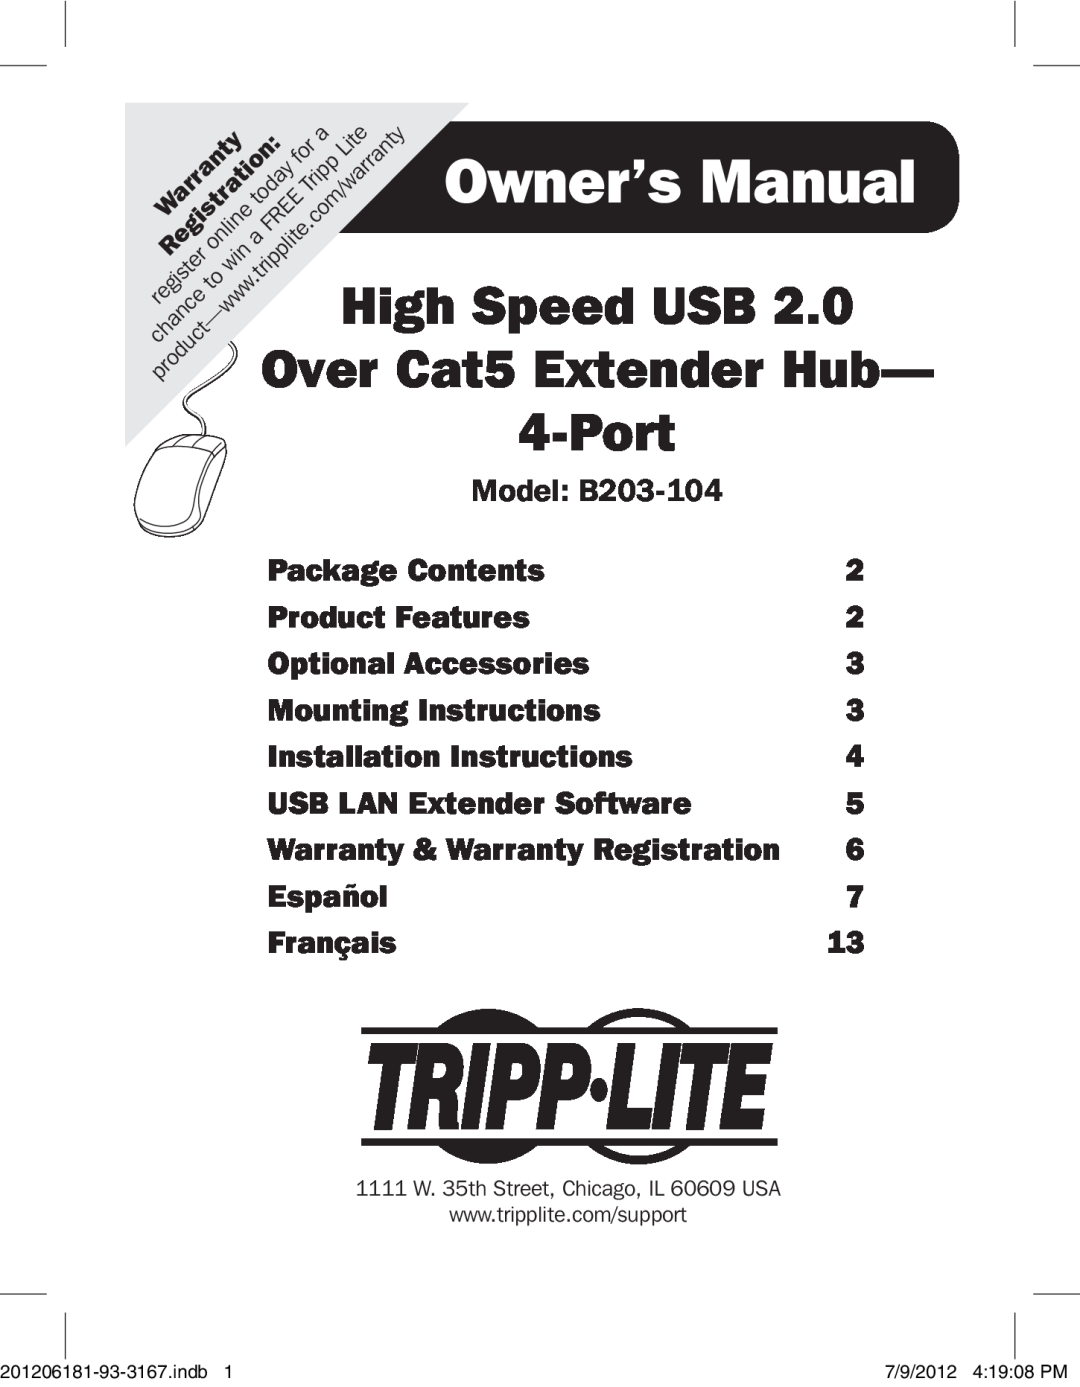 Tripp Lite B203-104 owner manual Over Cat5 Extender Hub, Package Contents, Product Features, Optional Accessories, Español 